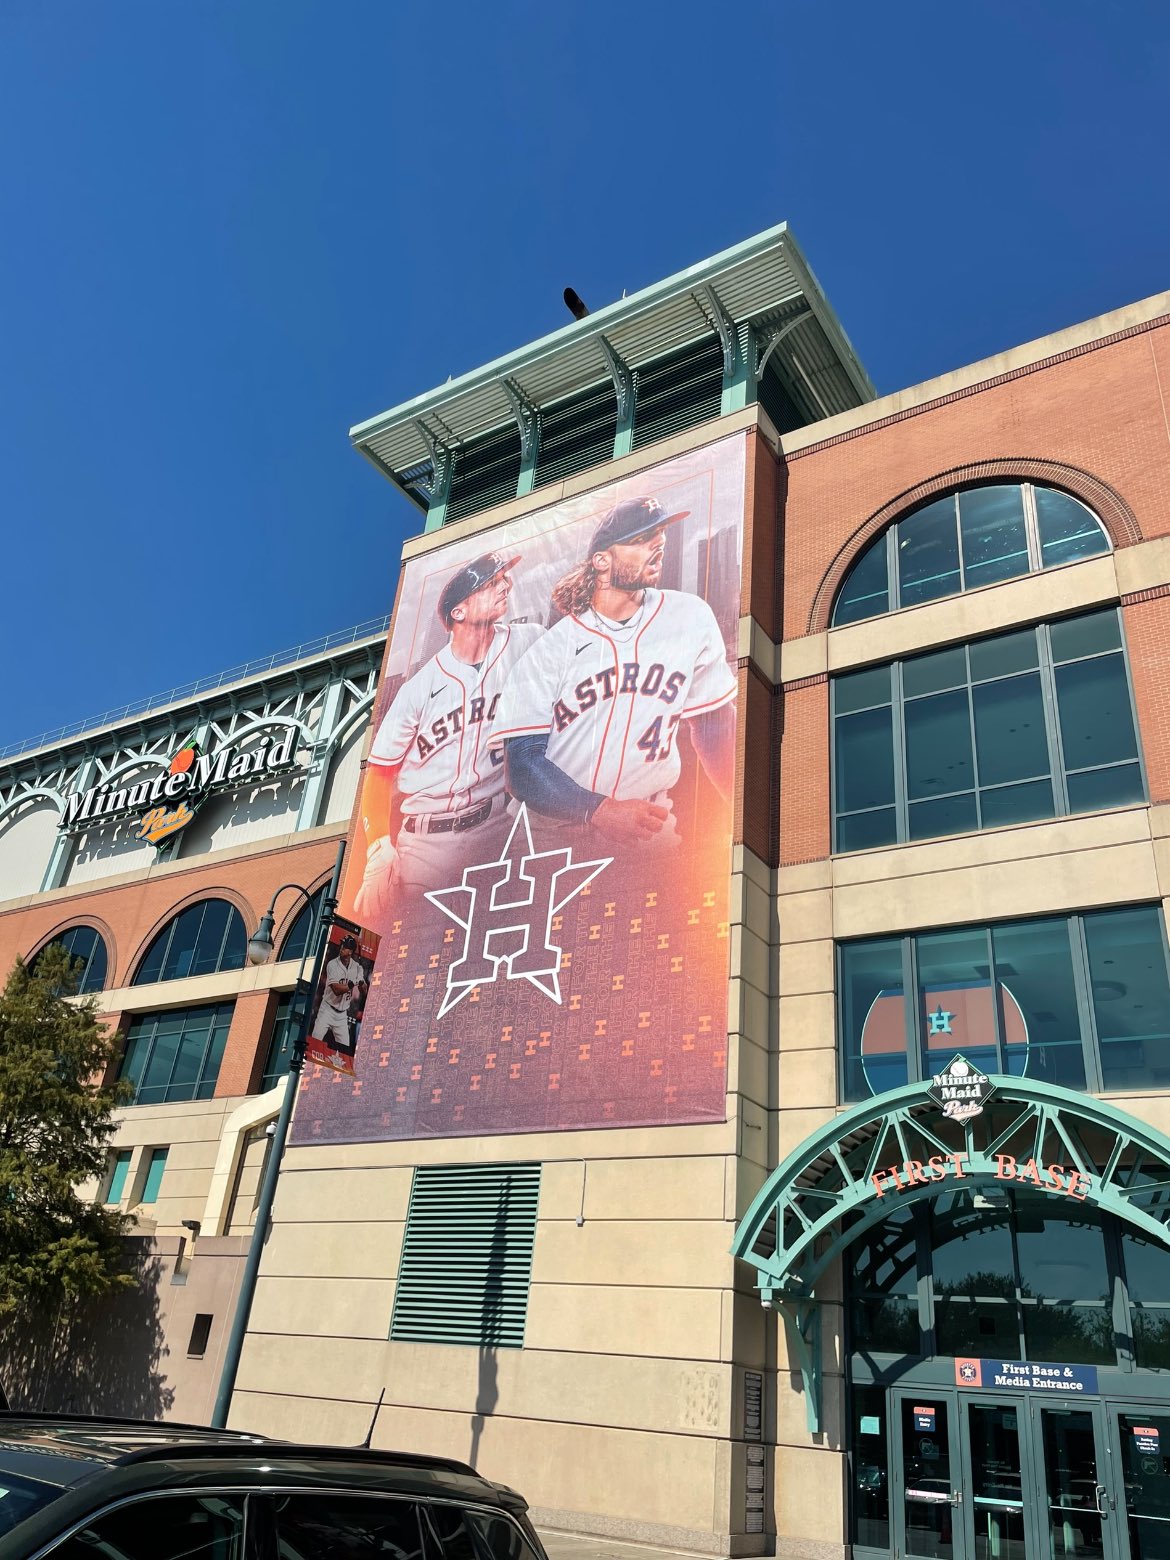 Chandler Rome on X: New playoff signage outside Minute Maid Park